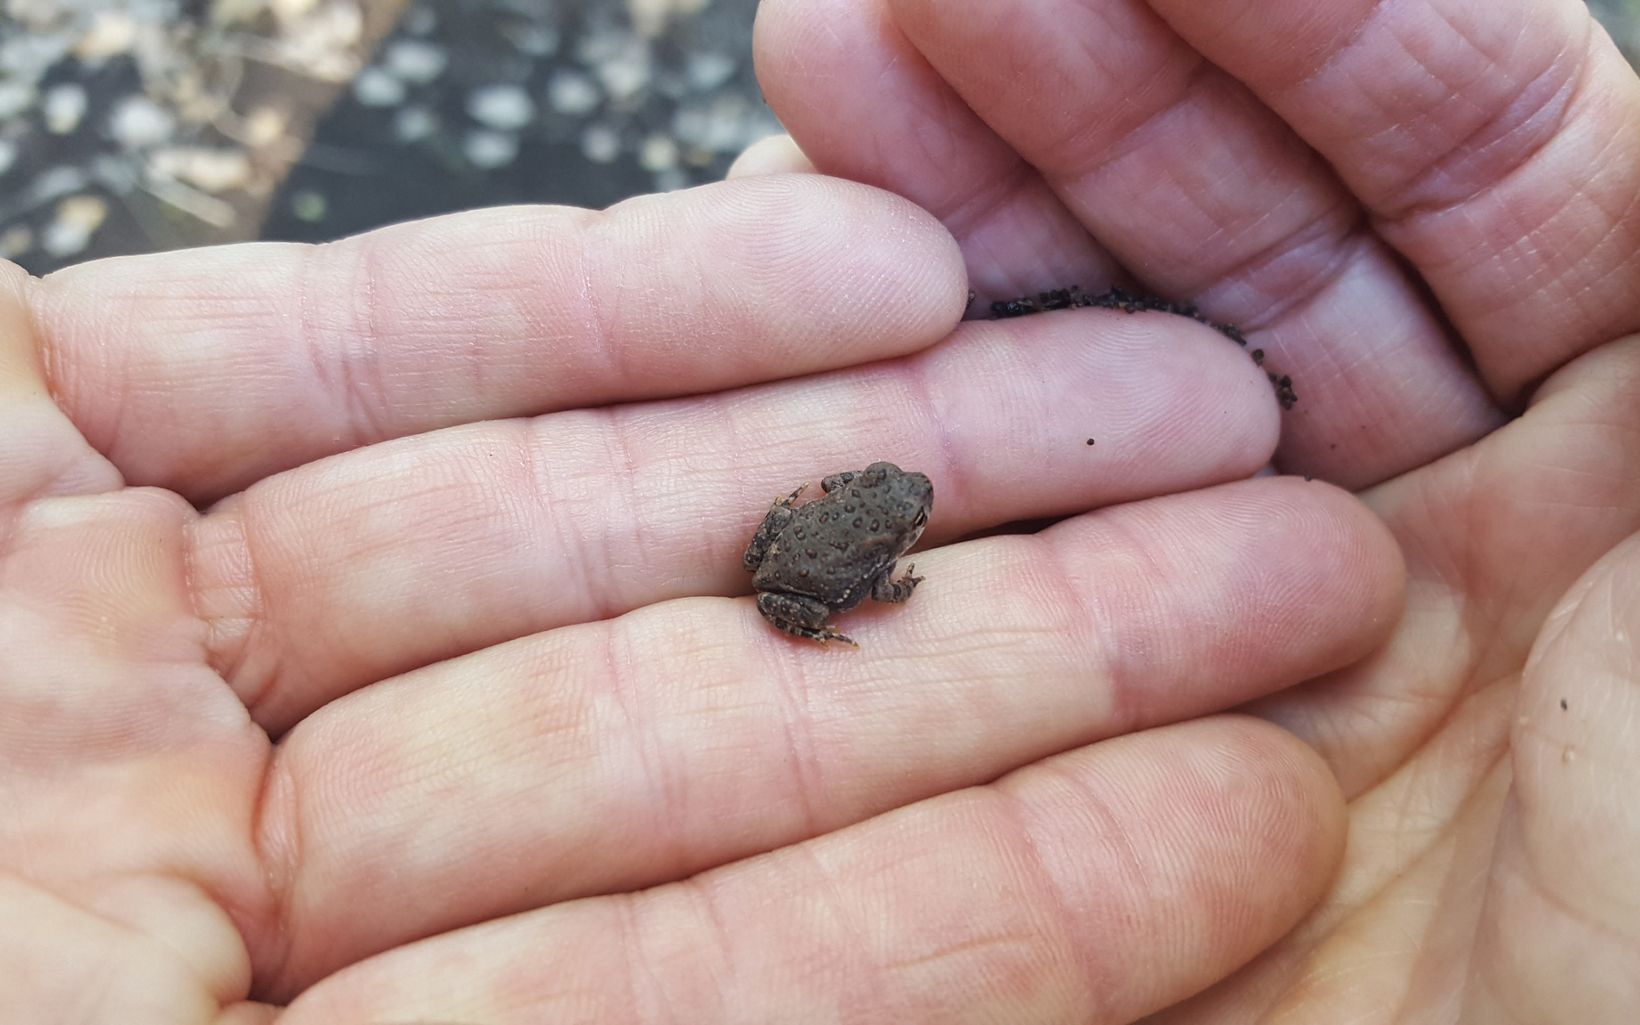 A tiny toad sits in the palm of an open hand.